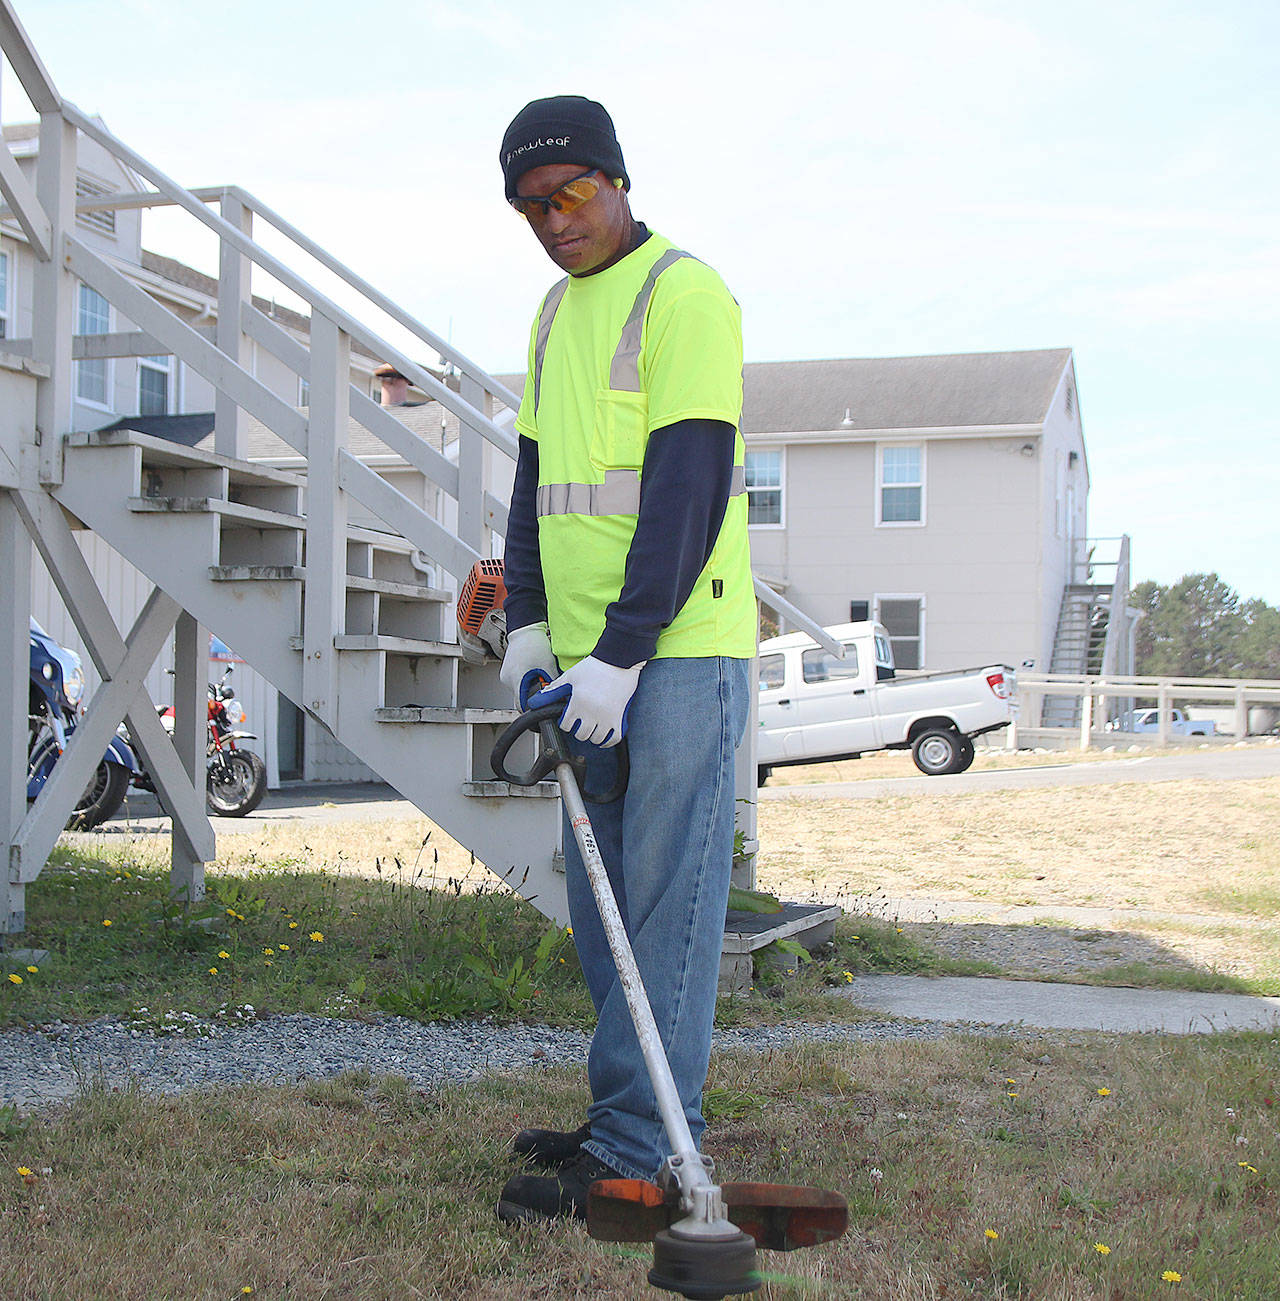 Photos by Laura Guido/Whidbey News-Times                                Gene Pulu works on the New Leaf grounds crew at Naval Air Station Whidbey Island. He was recently recognized by the base commander for his work.